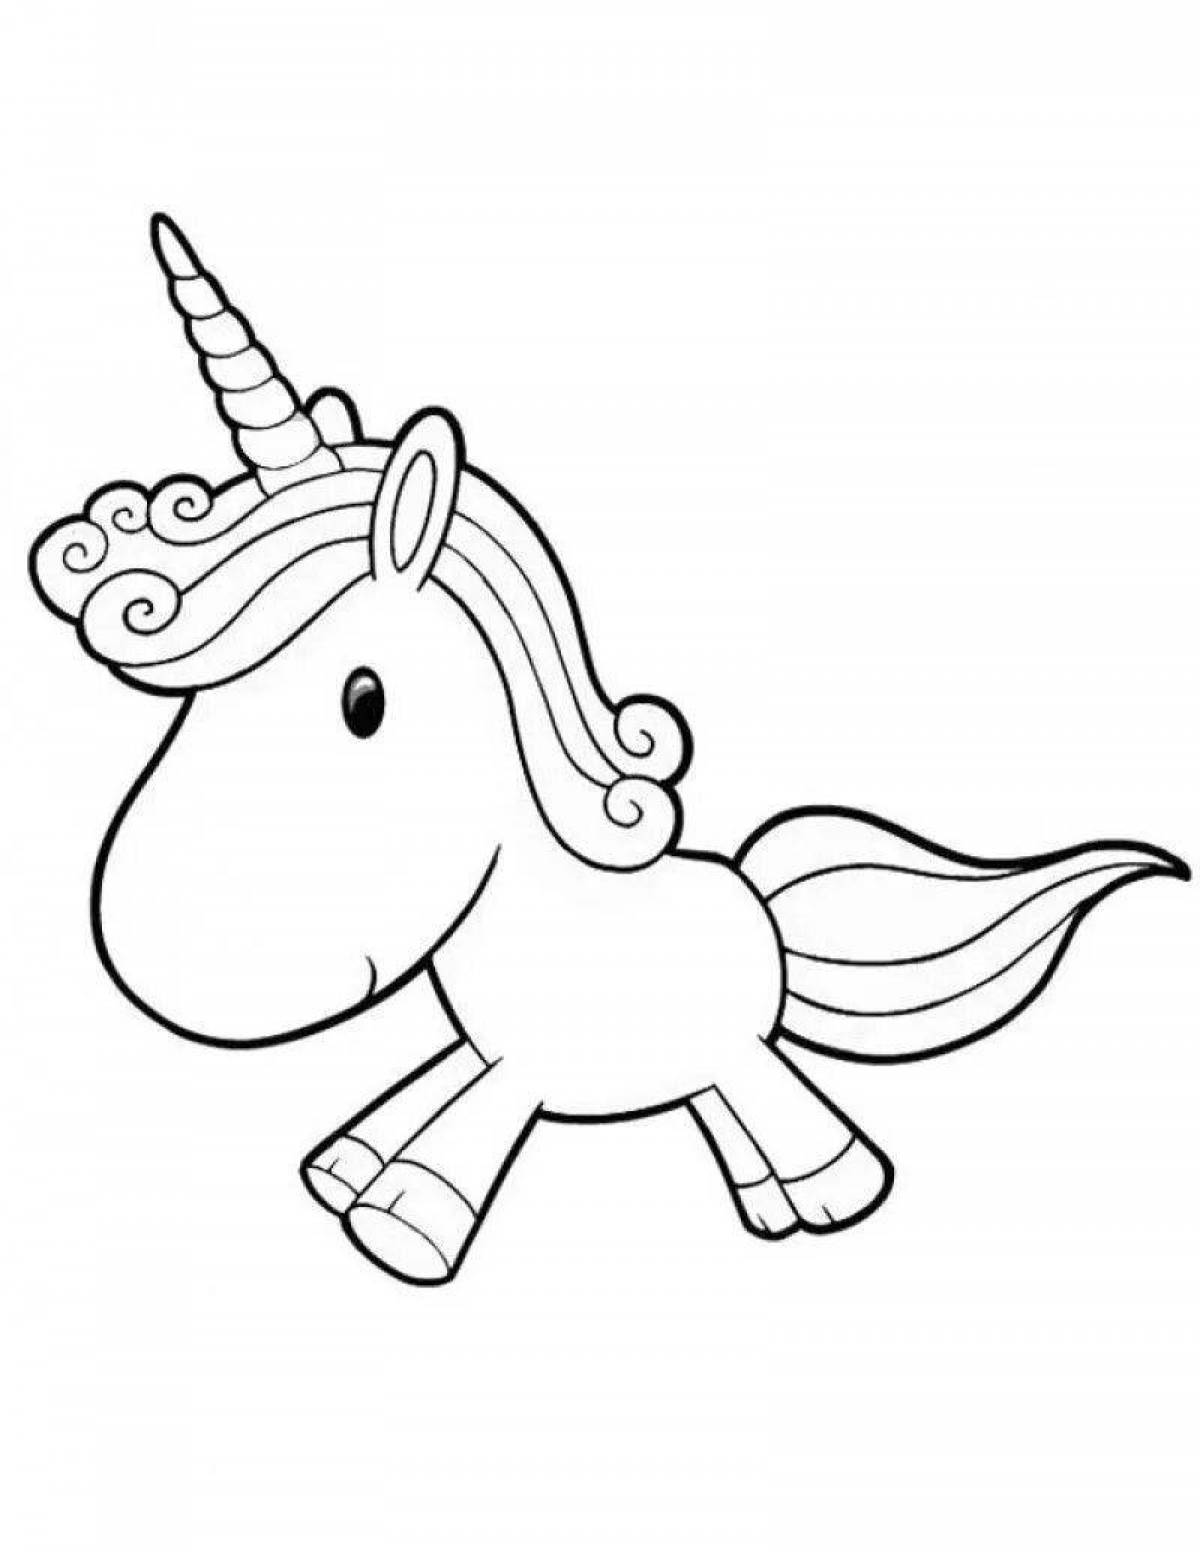 Fun coloring picture of a unicorn for kids